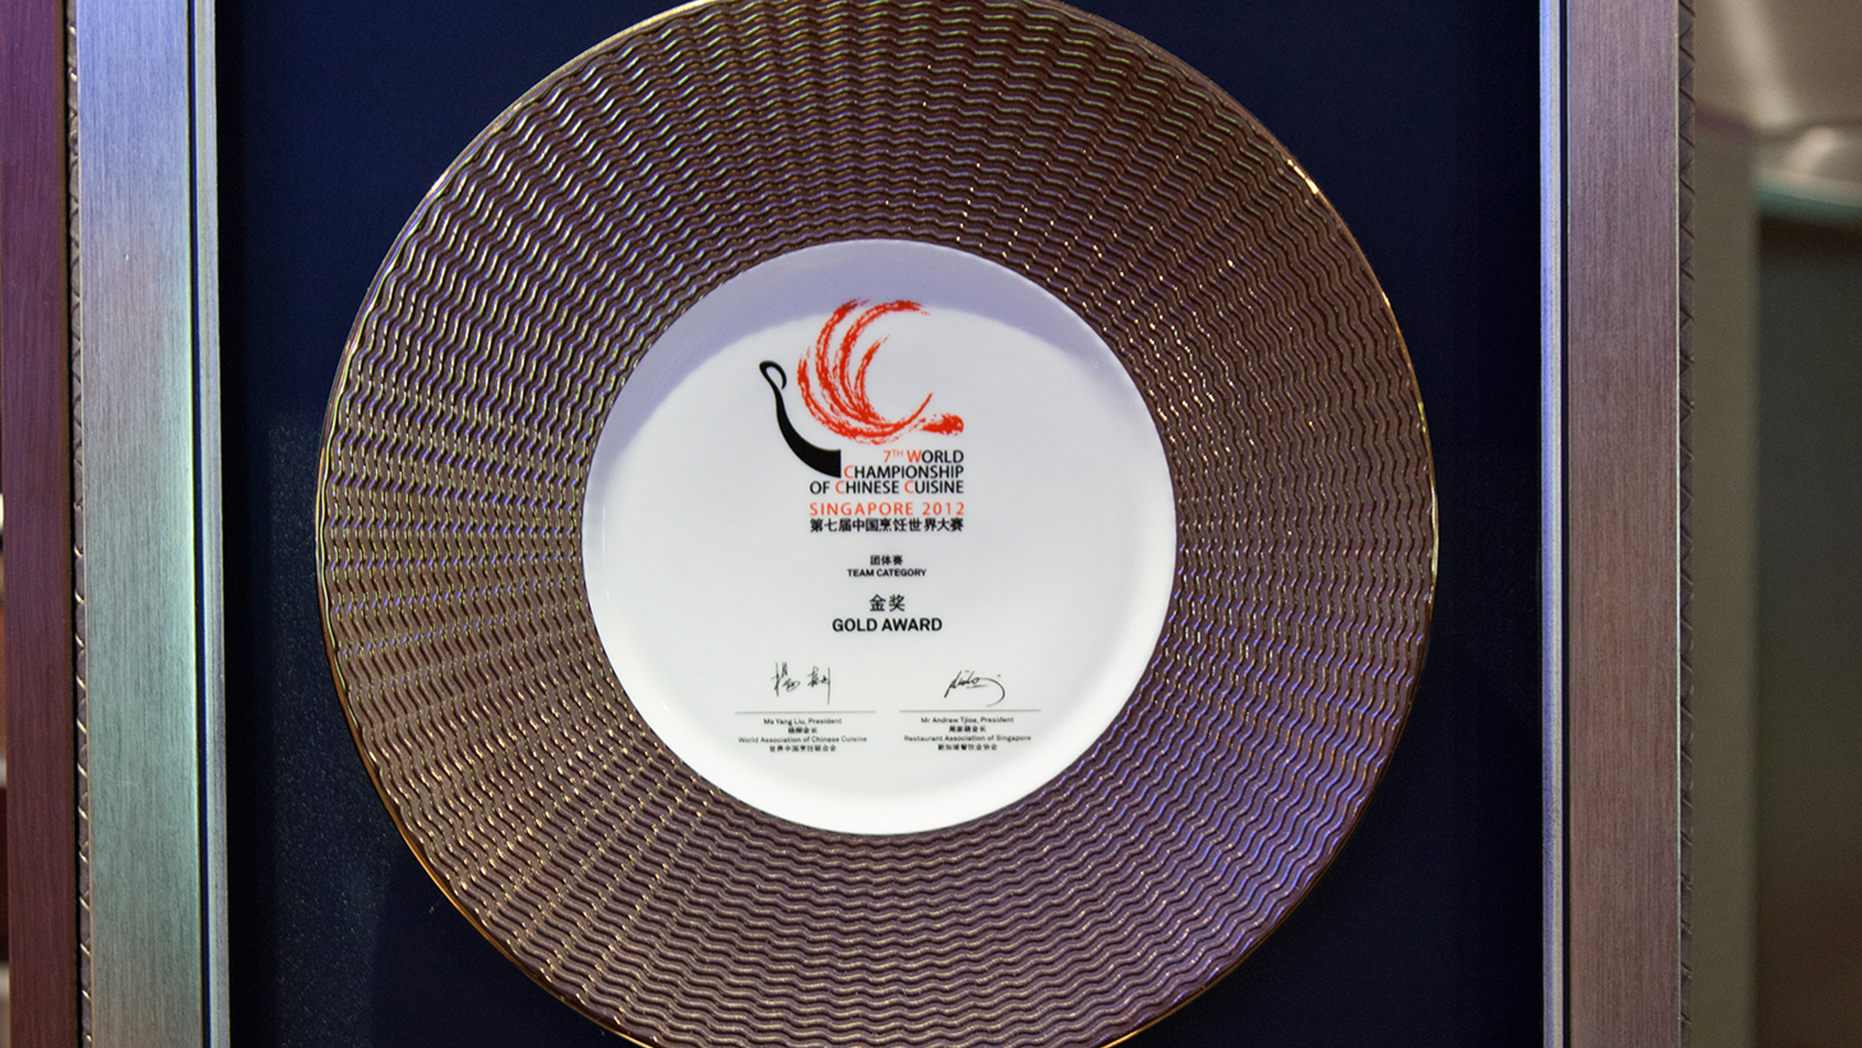 7th-world-championship-of-chinese-cuisine-2012-2